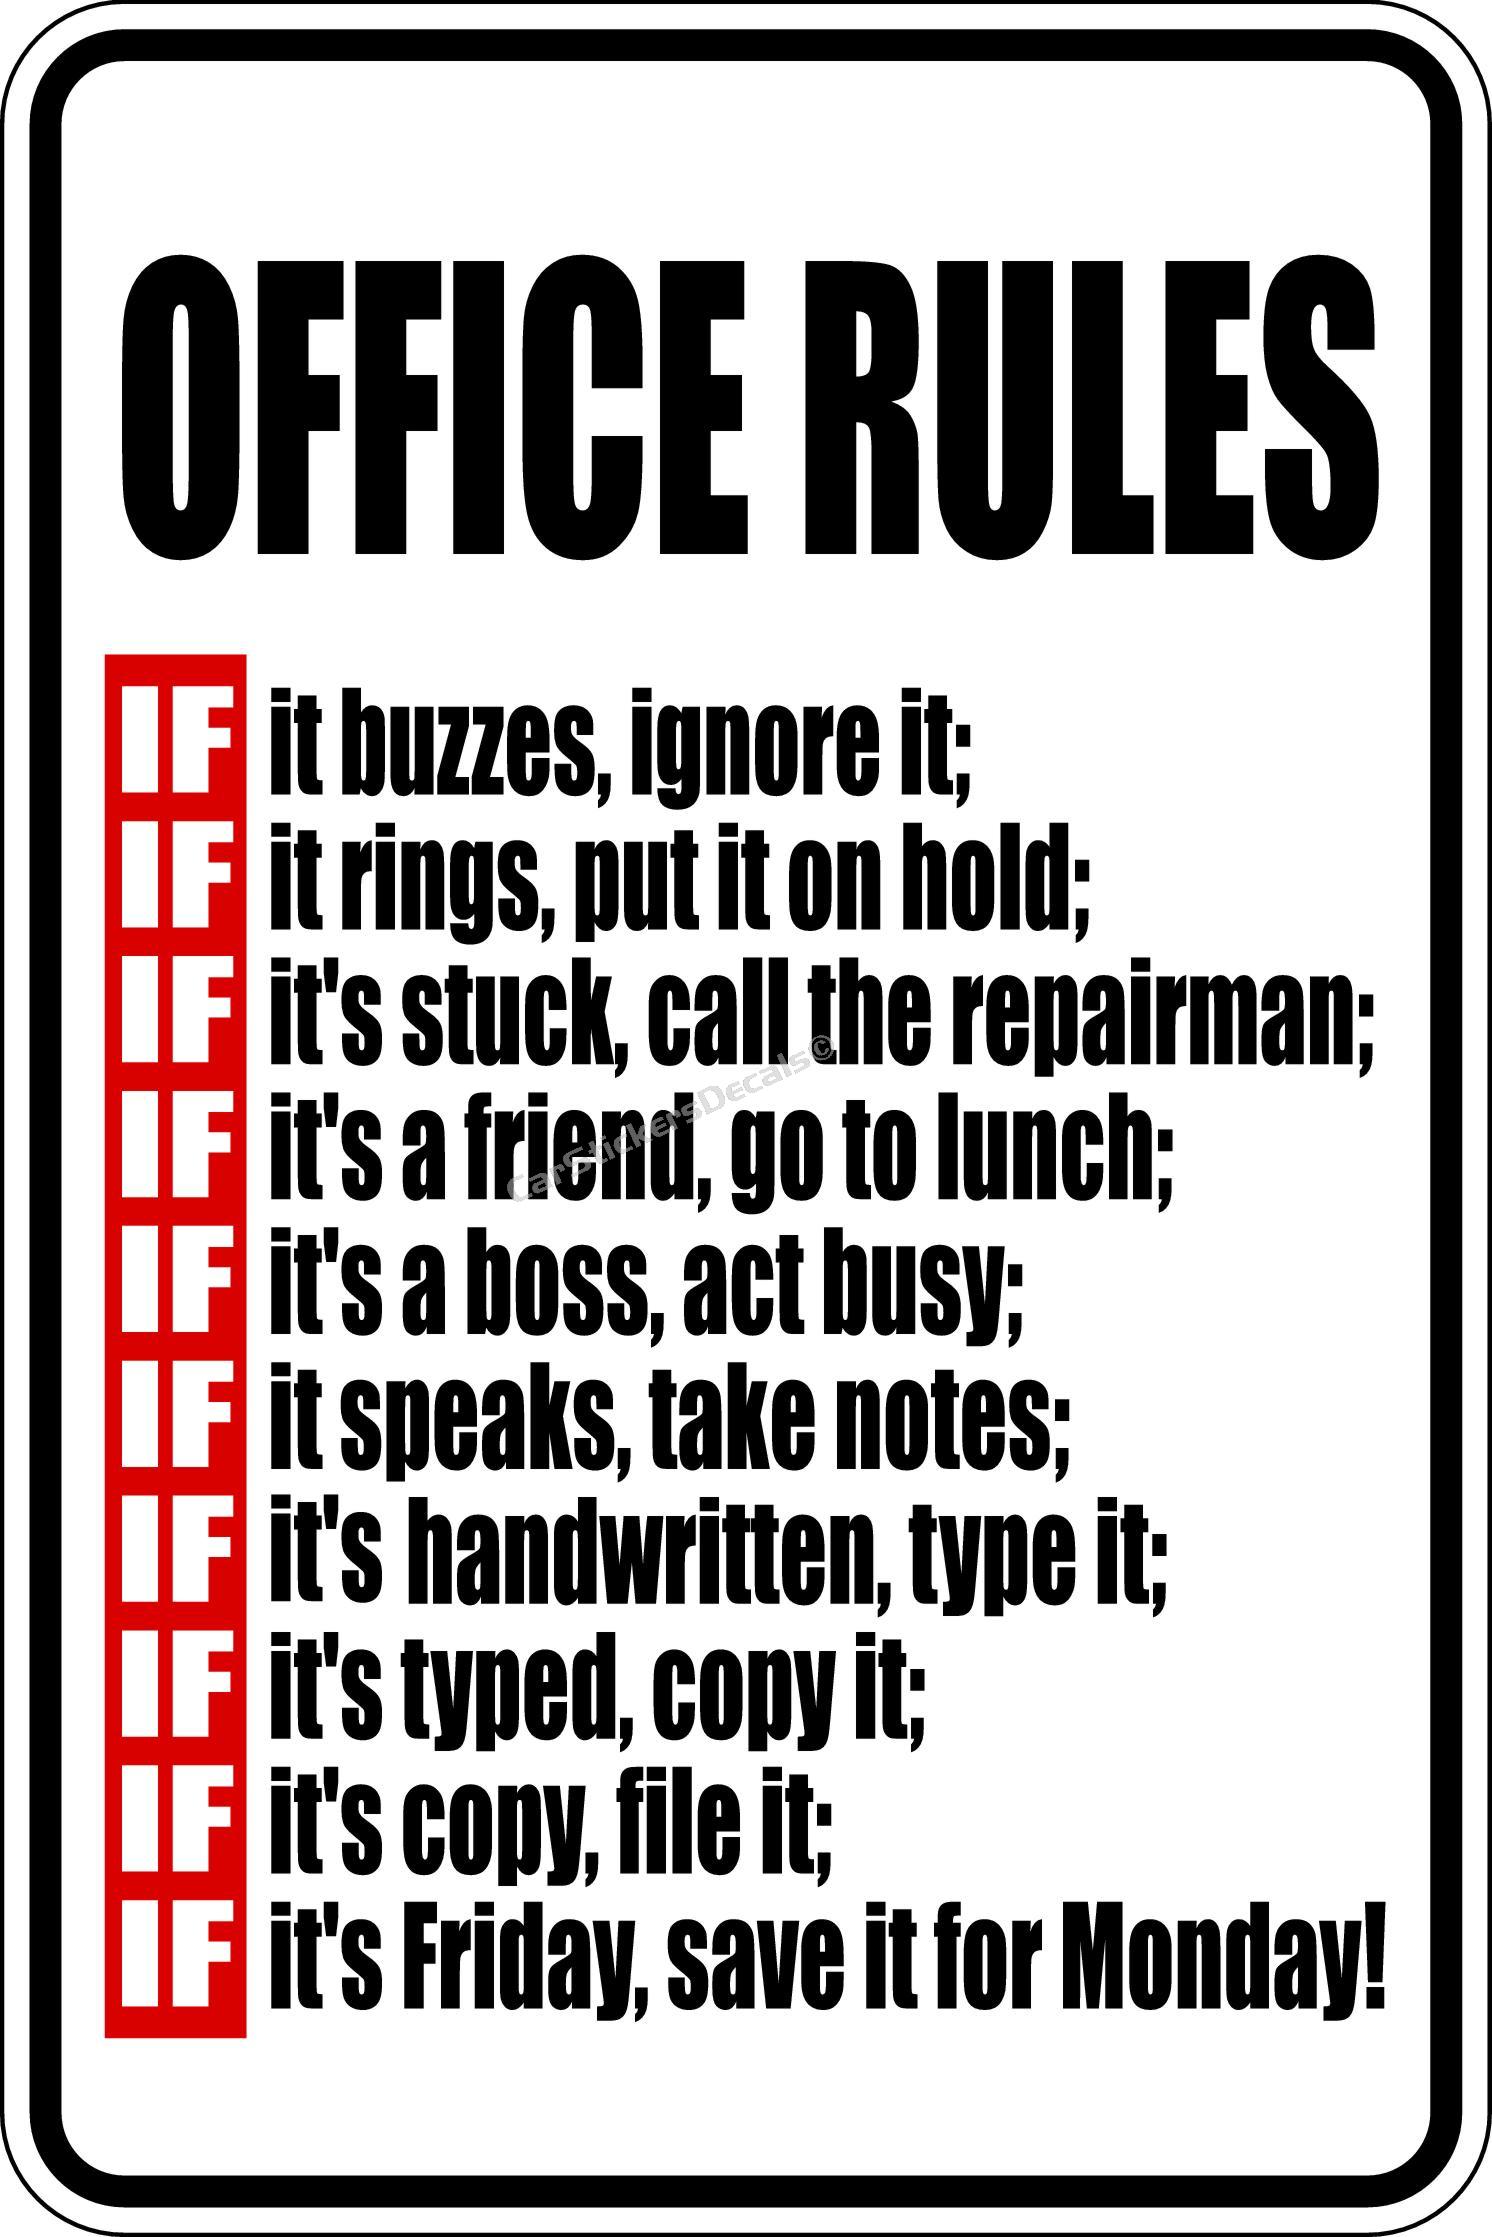 Office Printable Images Gallery Category Page 1 - printablee.com